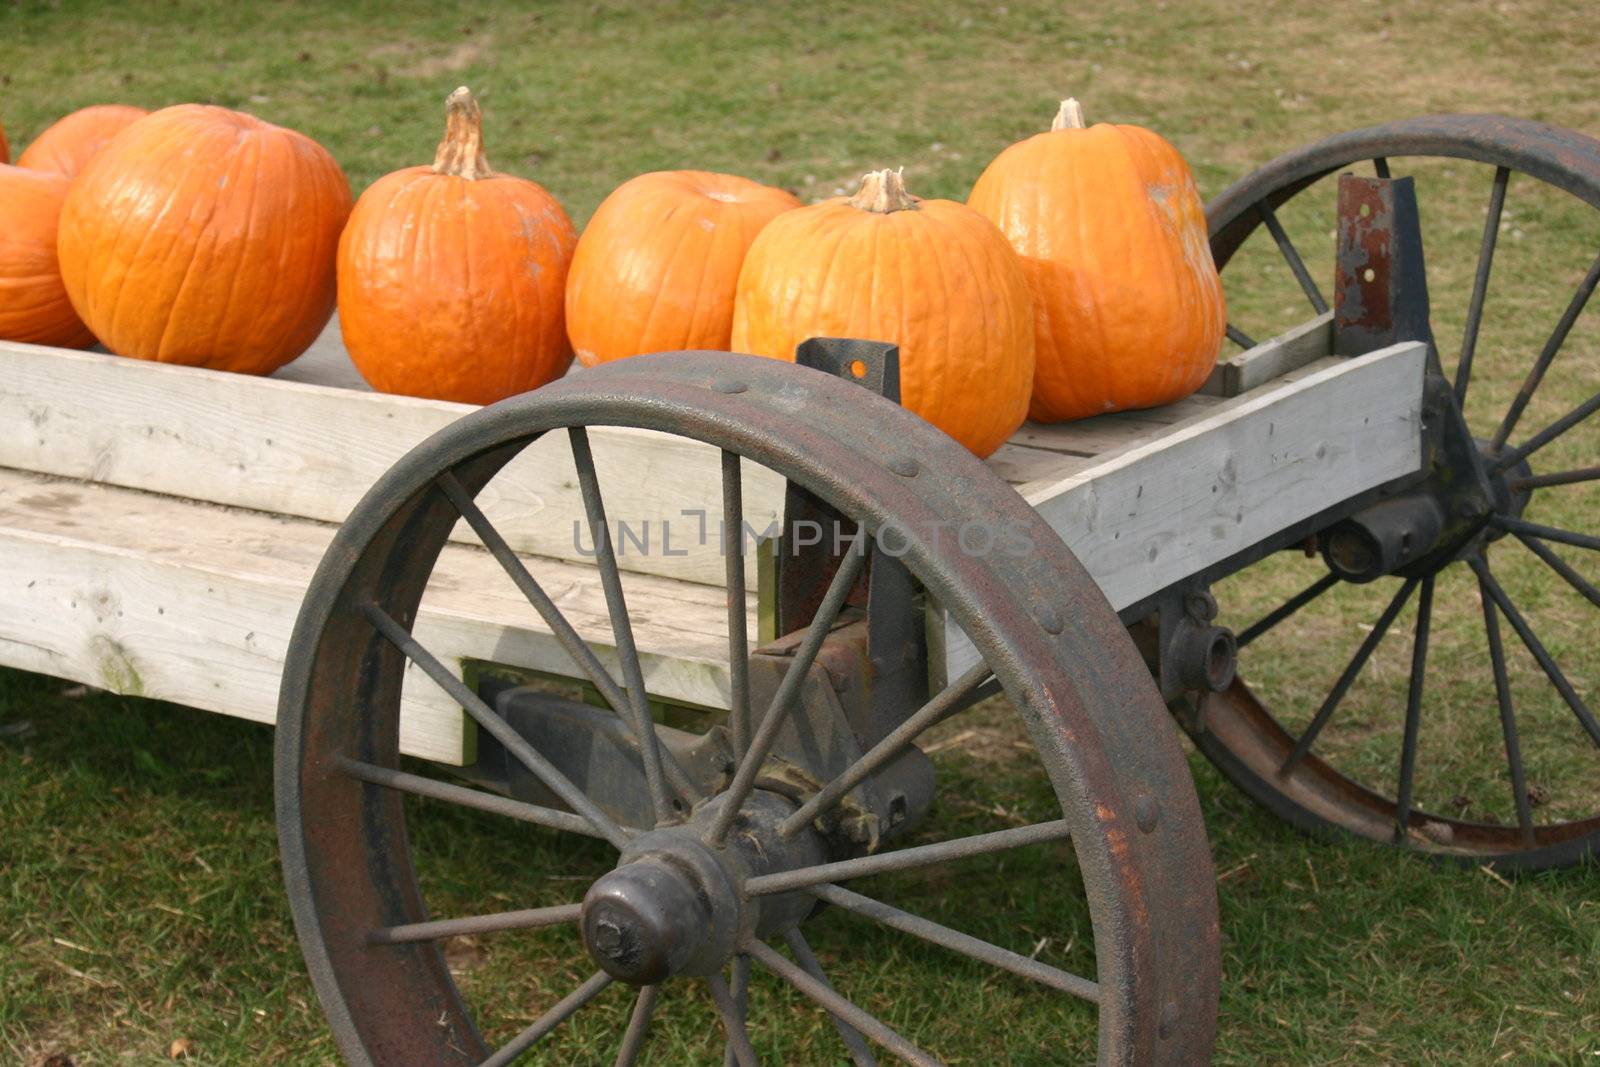 These pumpkins are on a farmers cart ready for sale.